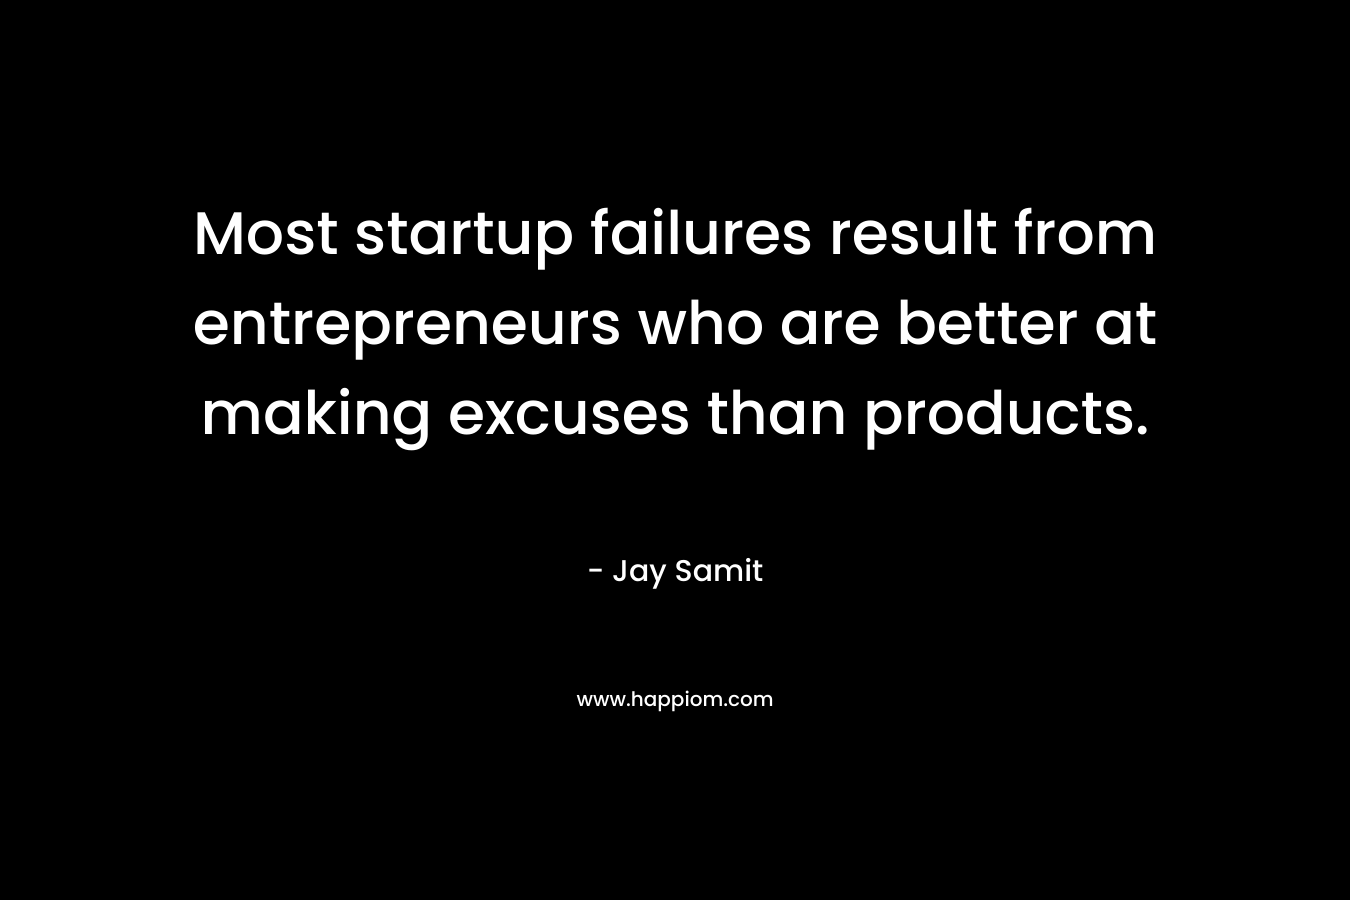 Most startup failures result from entrepreneurs who are better at making excuses than products.